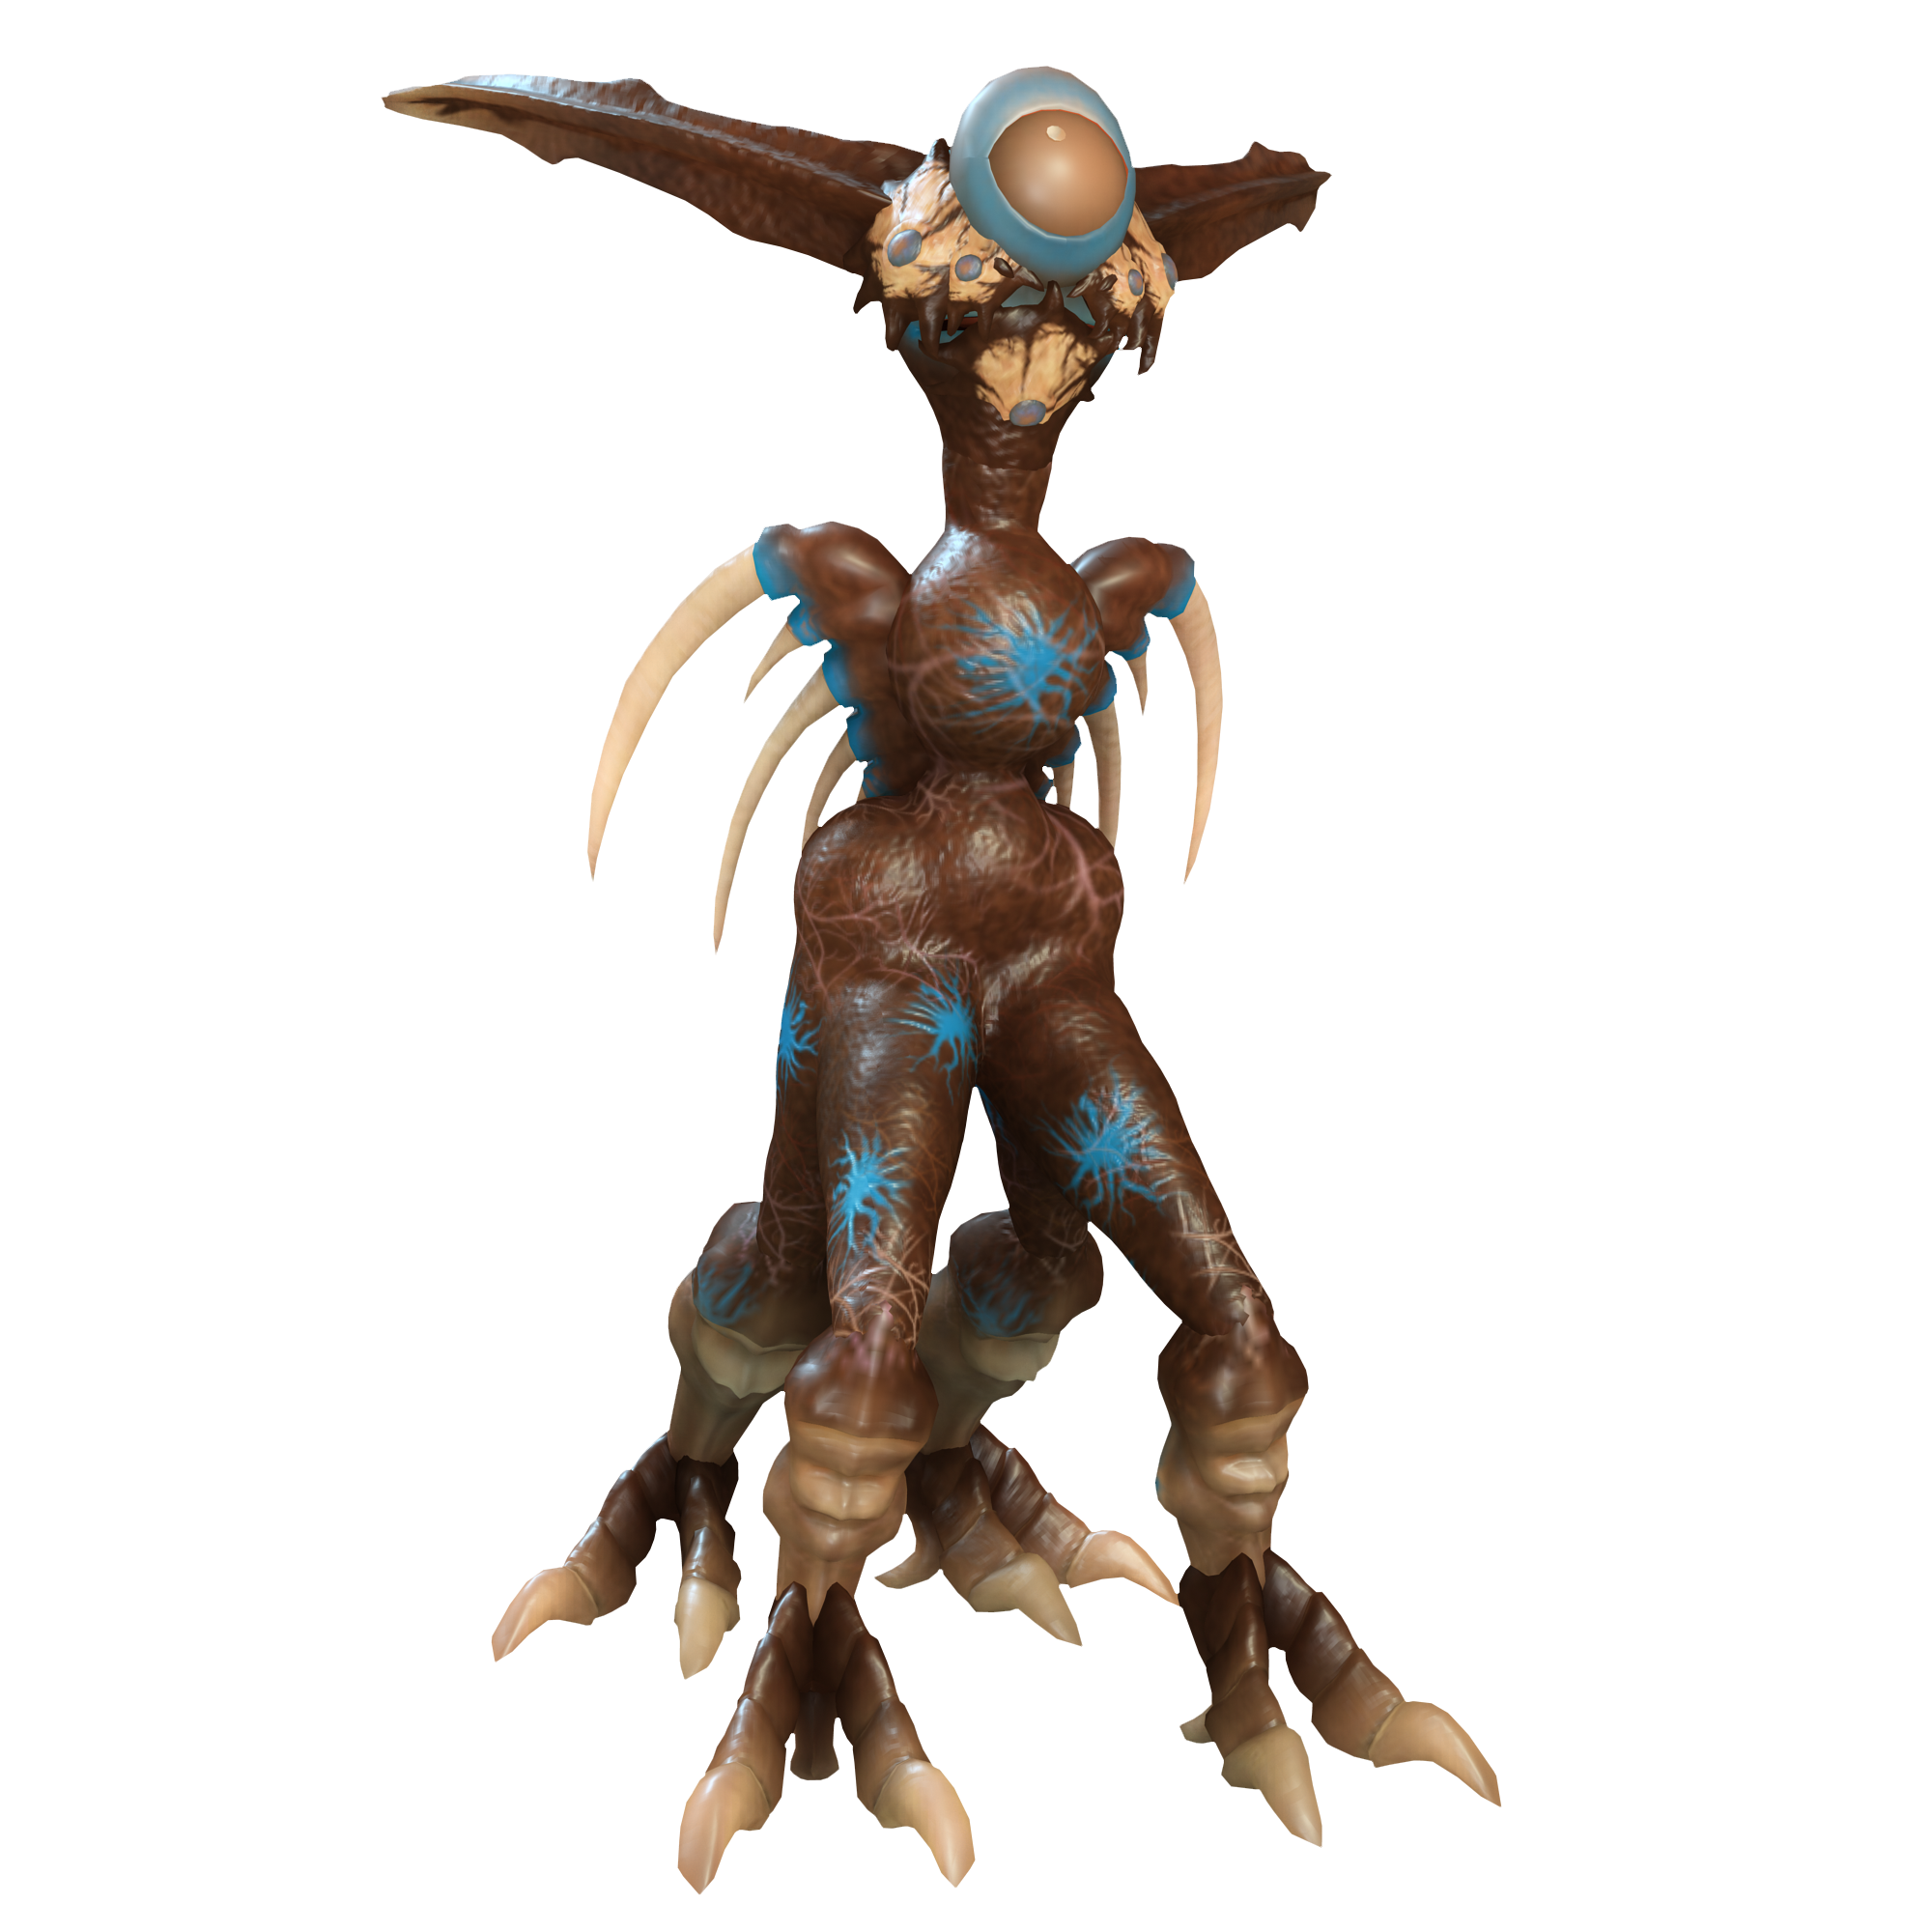 http://www.spore.com/static/war/images/community/renders/KARNLYknight.png